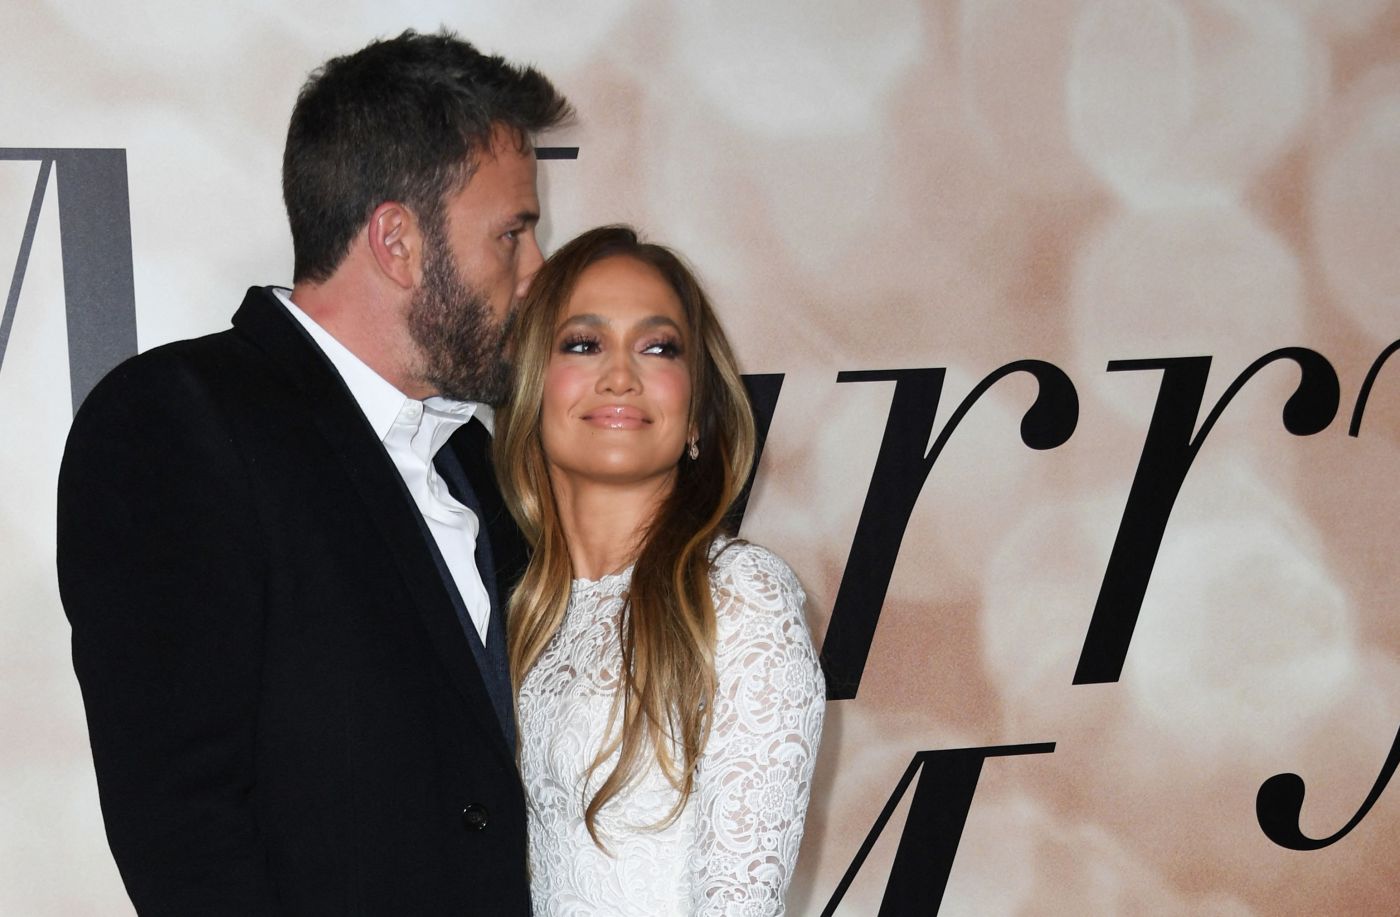 ben-affleck-and-jennifer-lopez:-‘everything-is-a-fight’-as-he-reluctantly-tries-couples-therapy-to-save-marriage